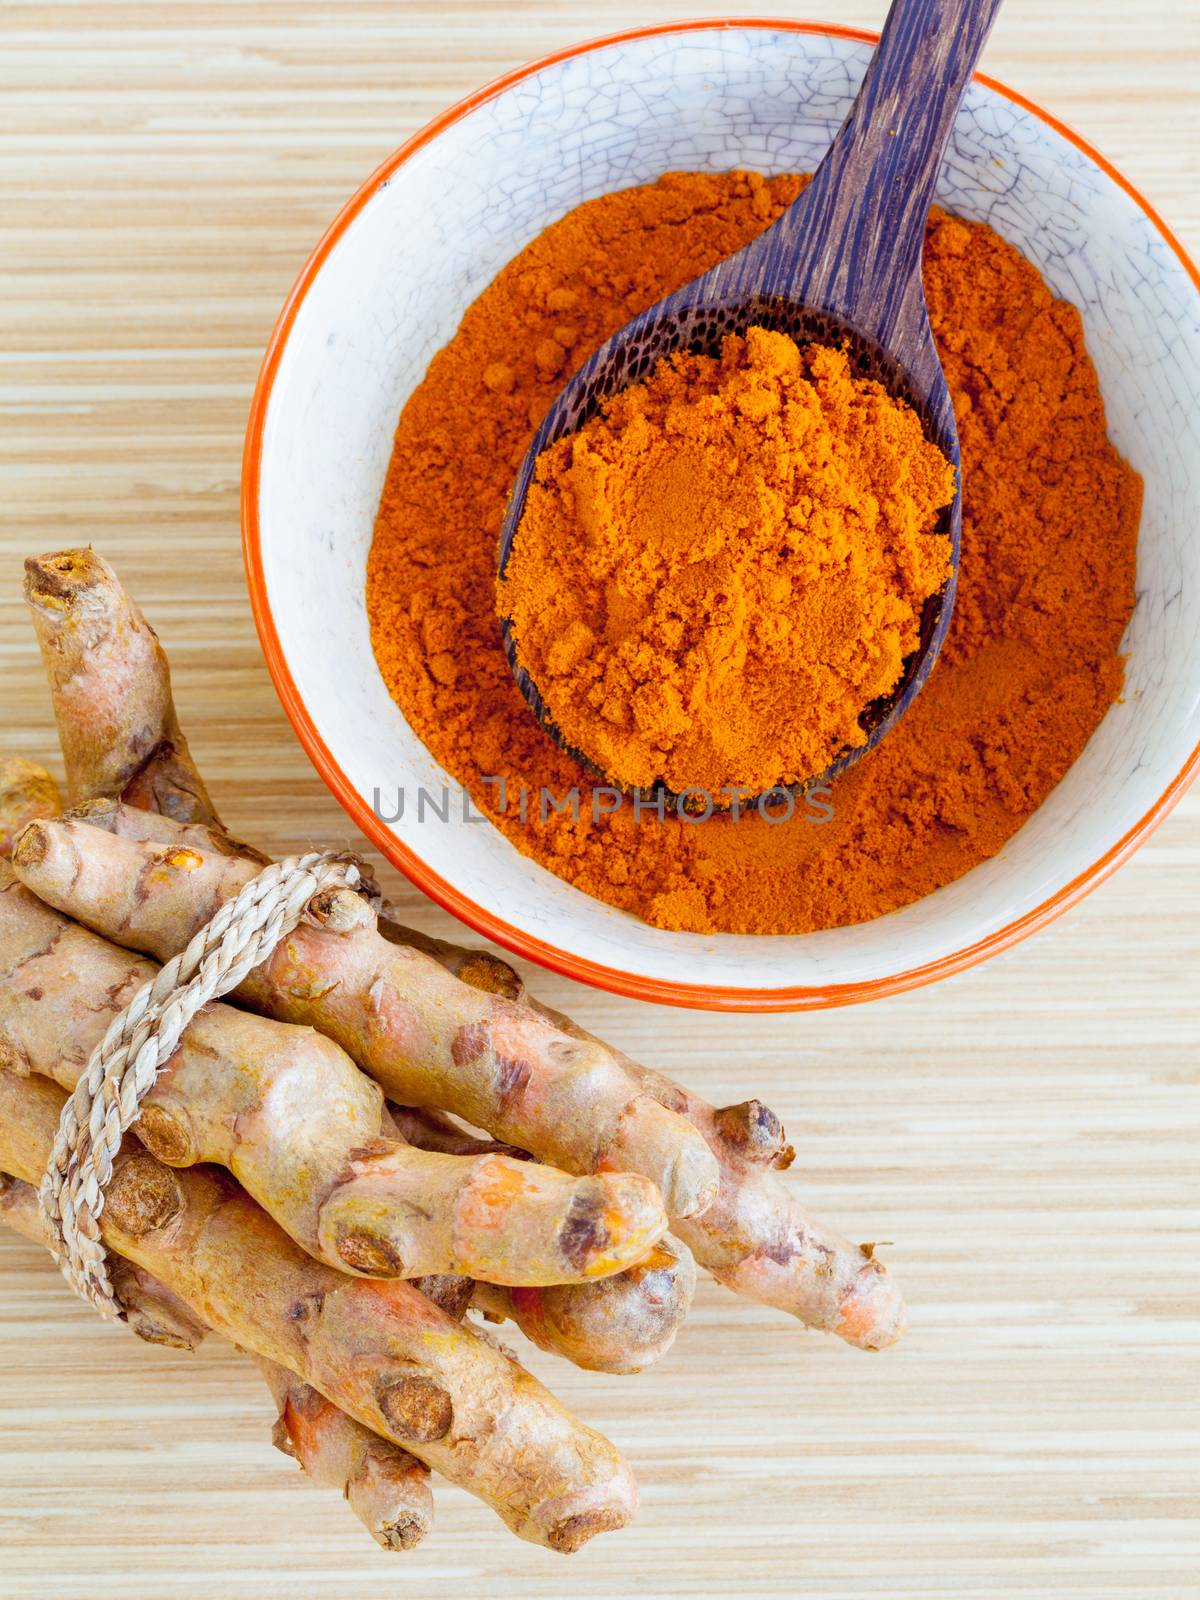  Natural Spa Ingredients . - Turmeric and honey  for skin care. by kerdkanno